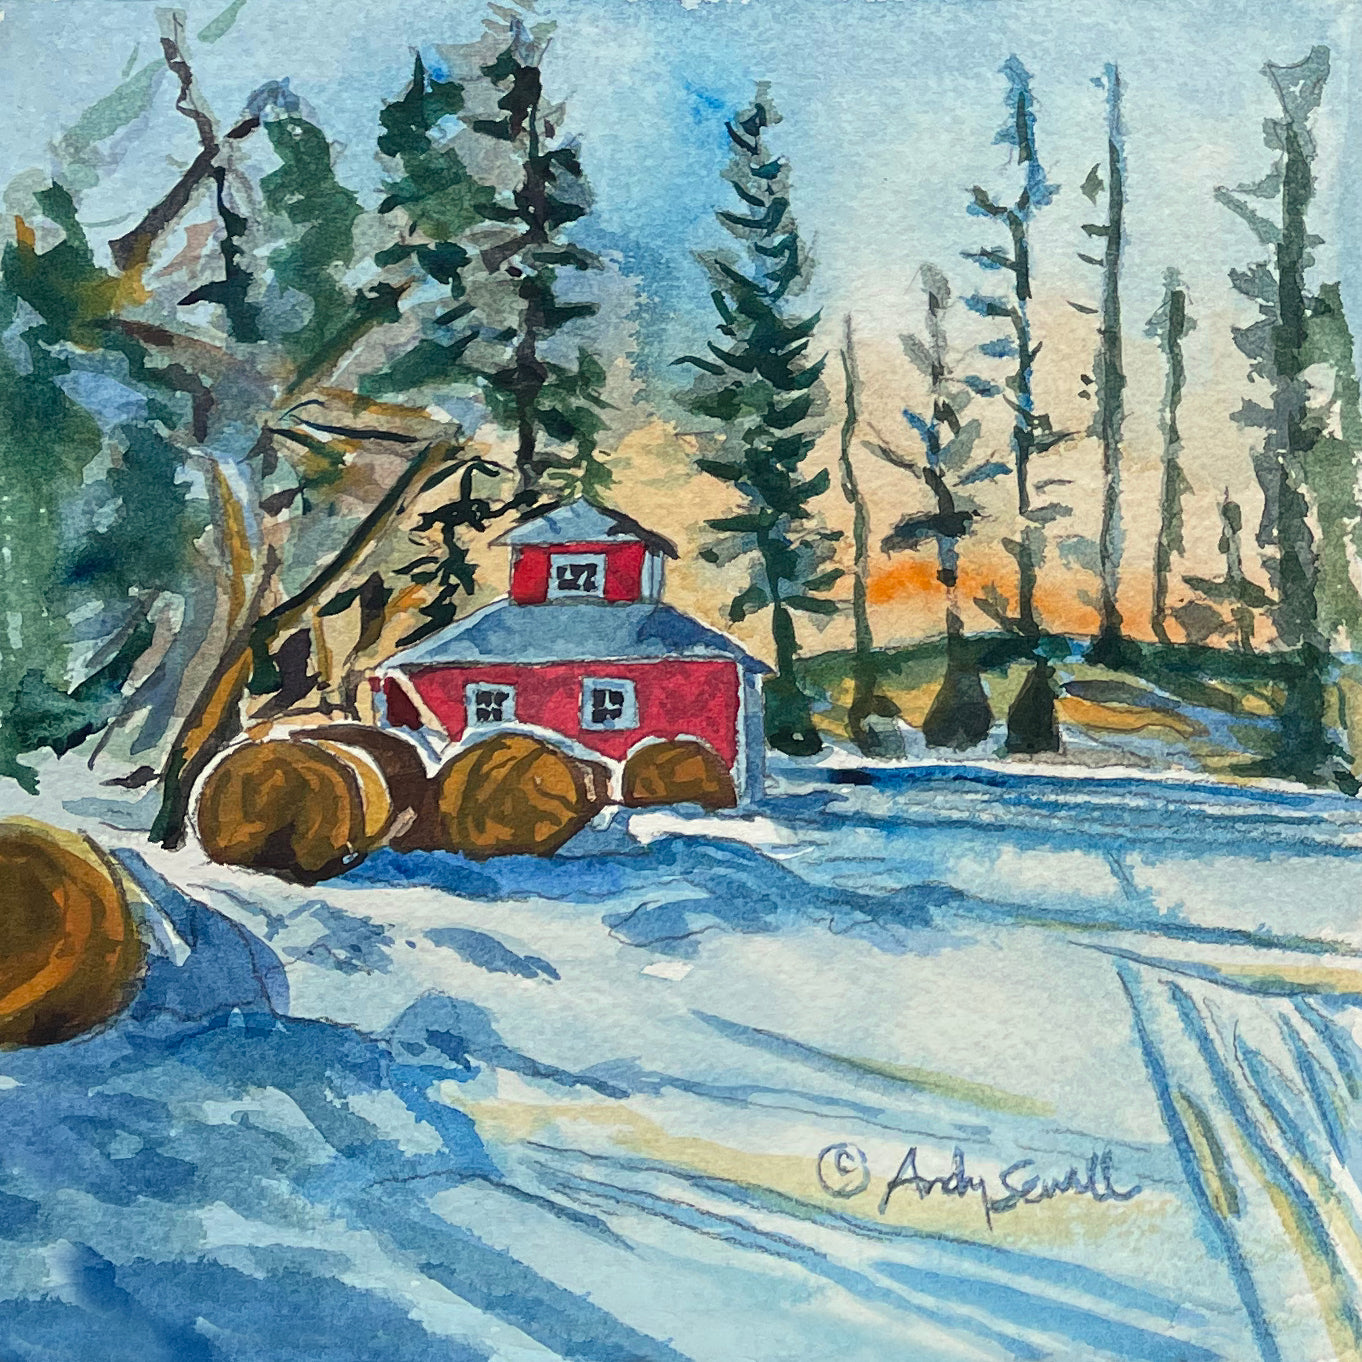 "Little Hay Barn" - 6"x6" Original watercolor or signed edition giclee art print from an original watercolor